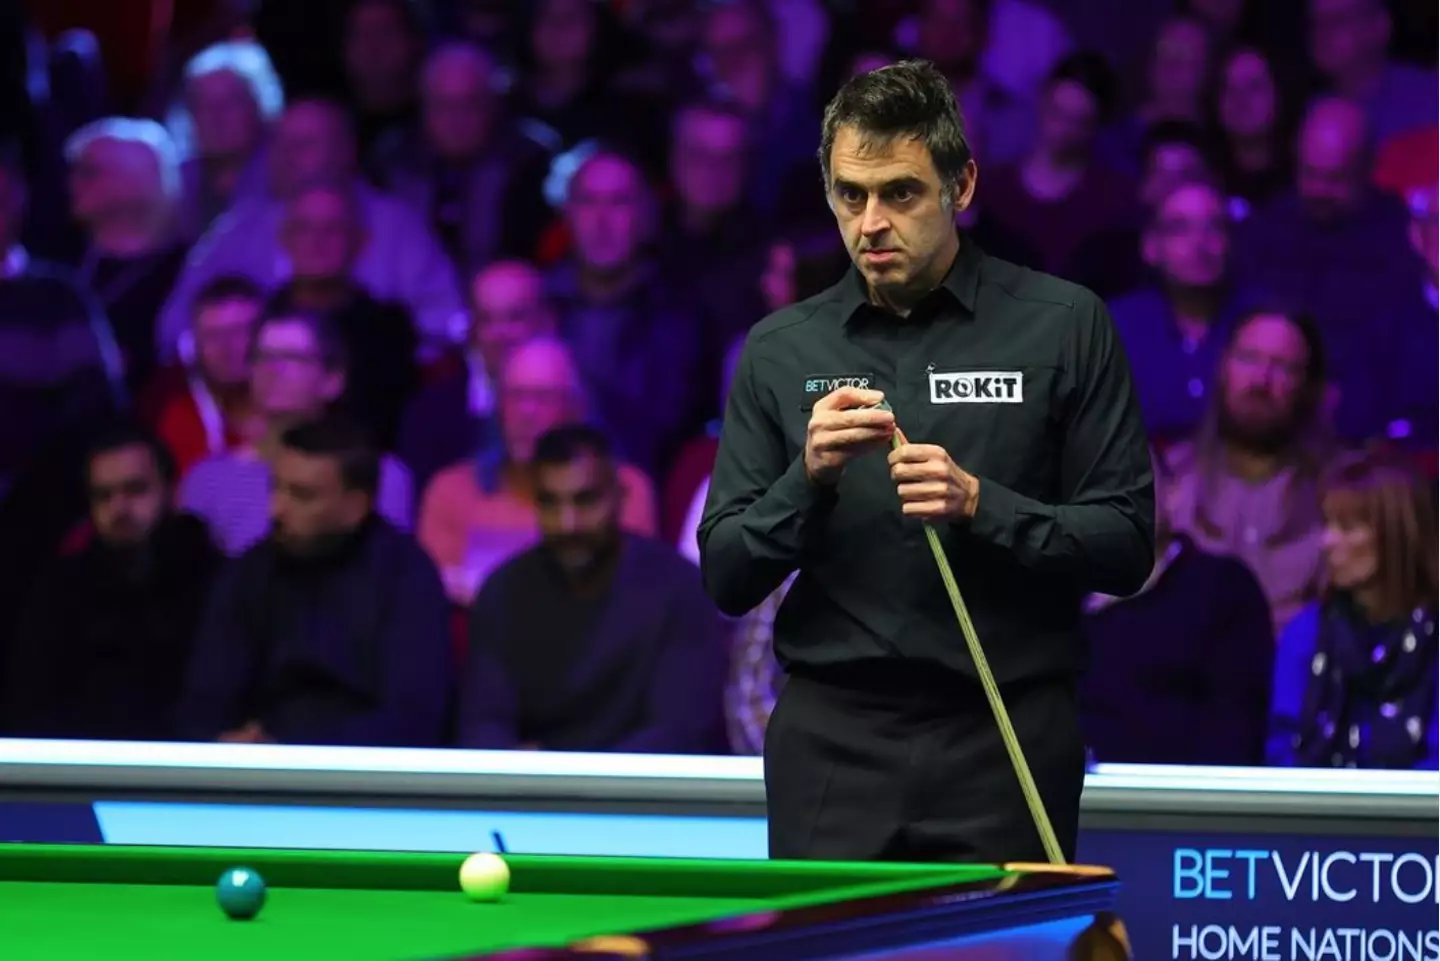 Snooker legend Ronnie O'Sullivan revealed he was once strip-searched by police.